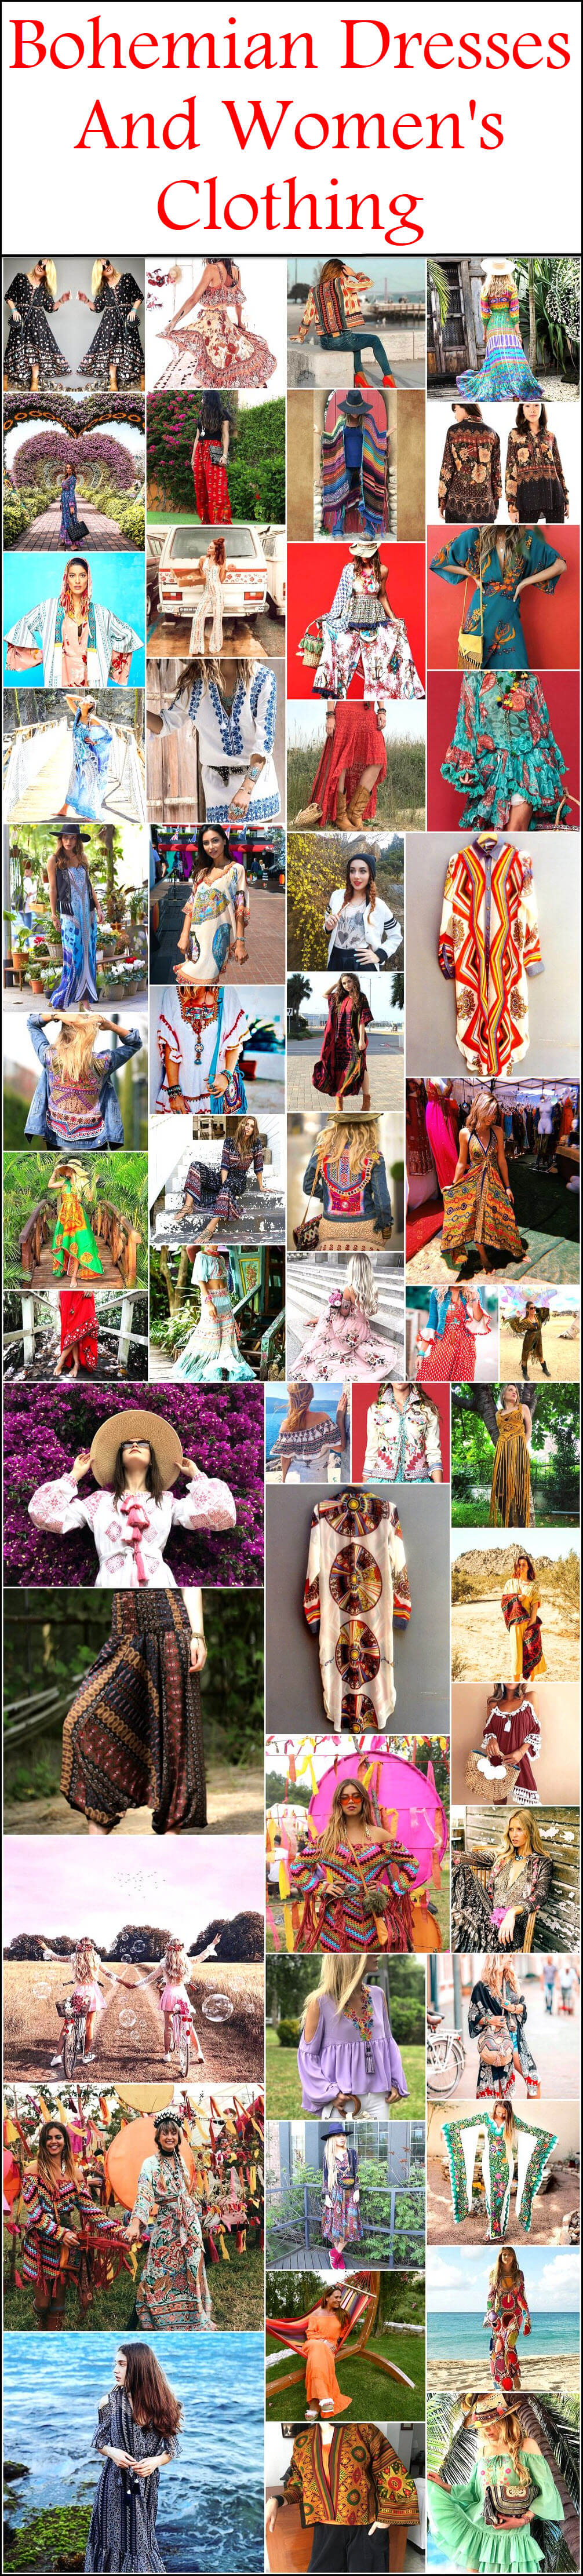 Bohemian Dresses And Women's Clothing